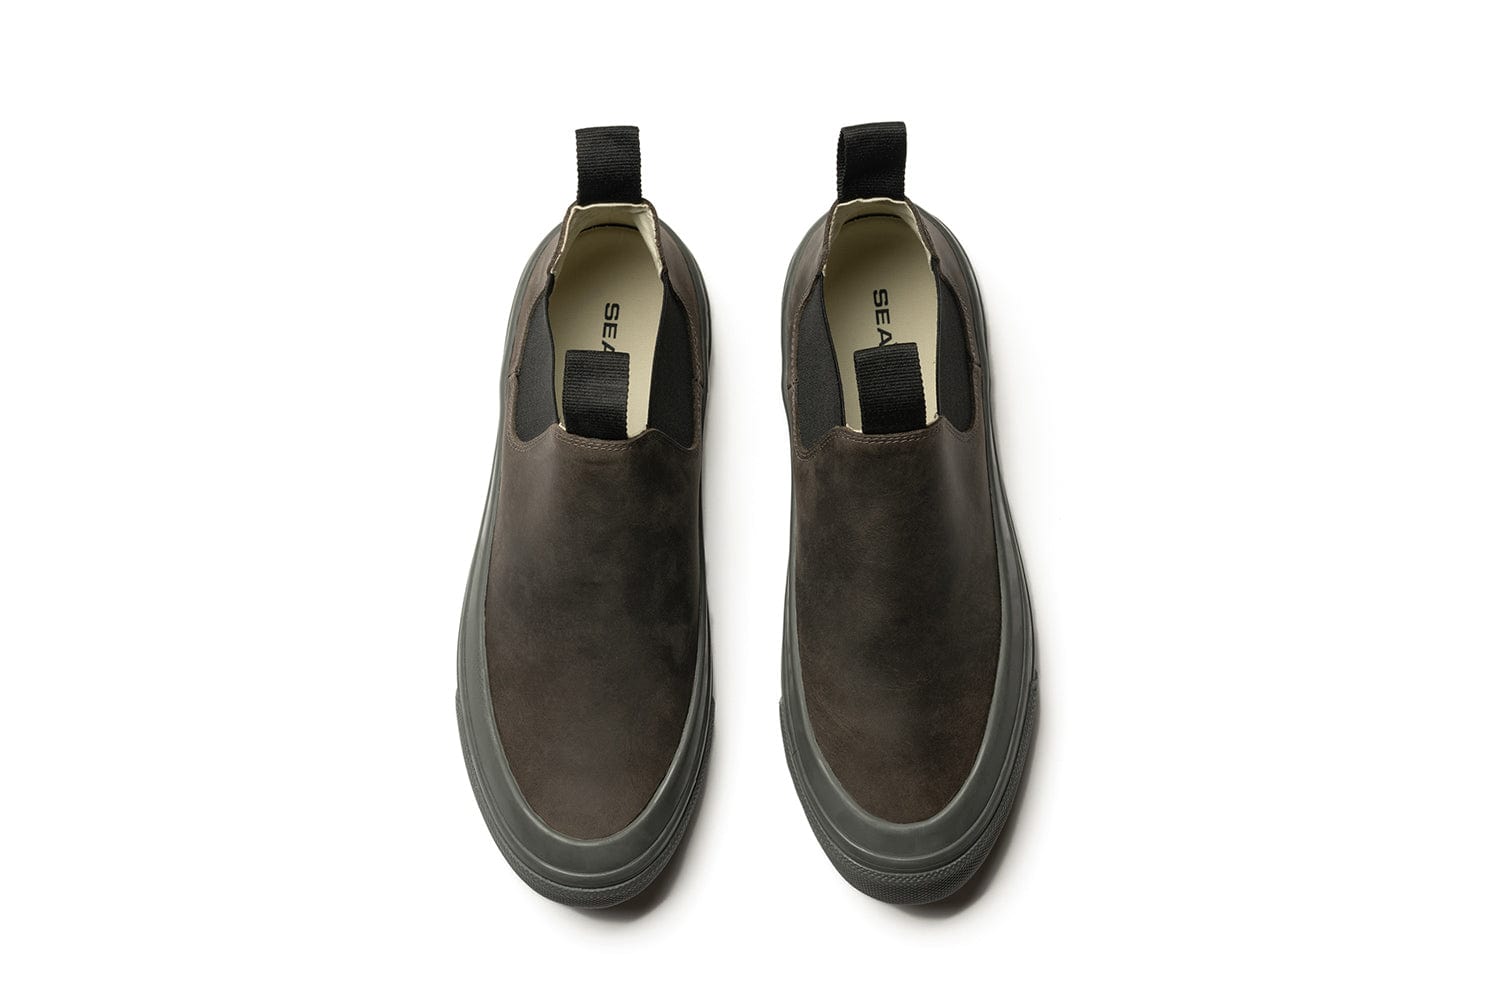 Top-down view of Ballard Boots in Charcoal, showcasing the round toe and elastic sides.